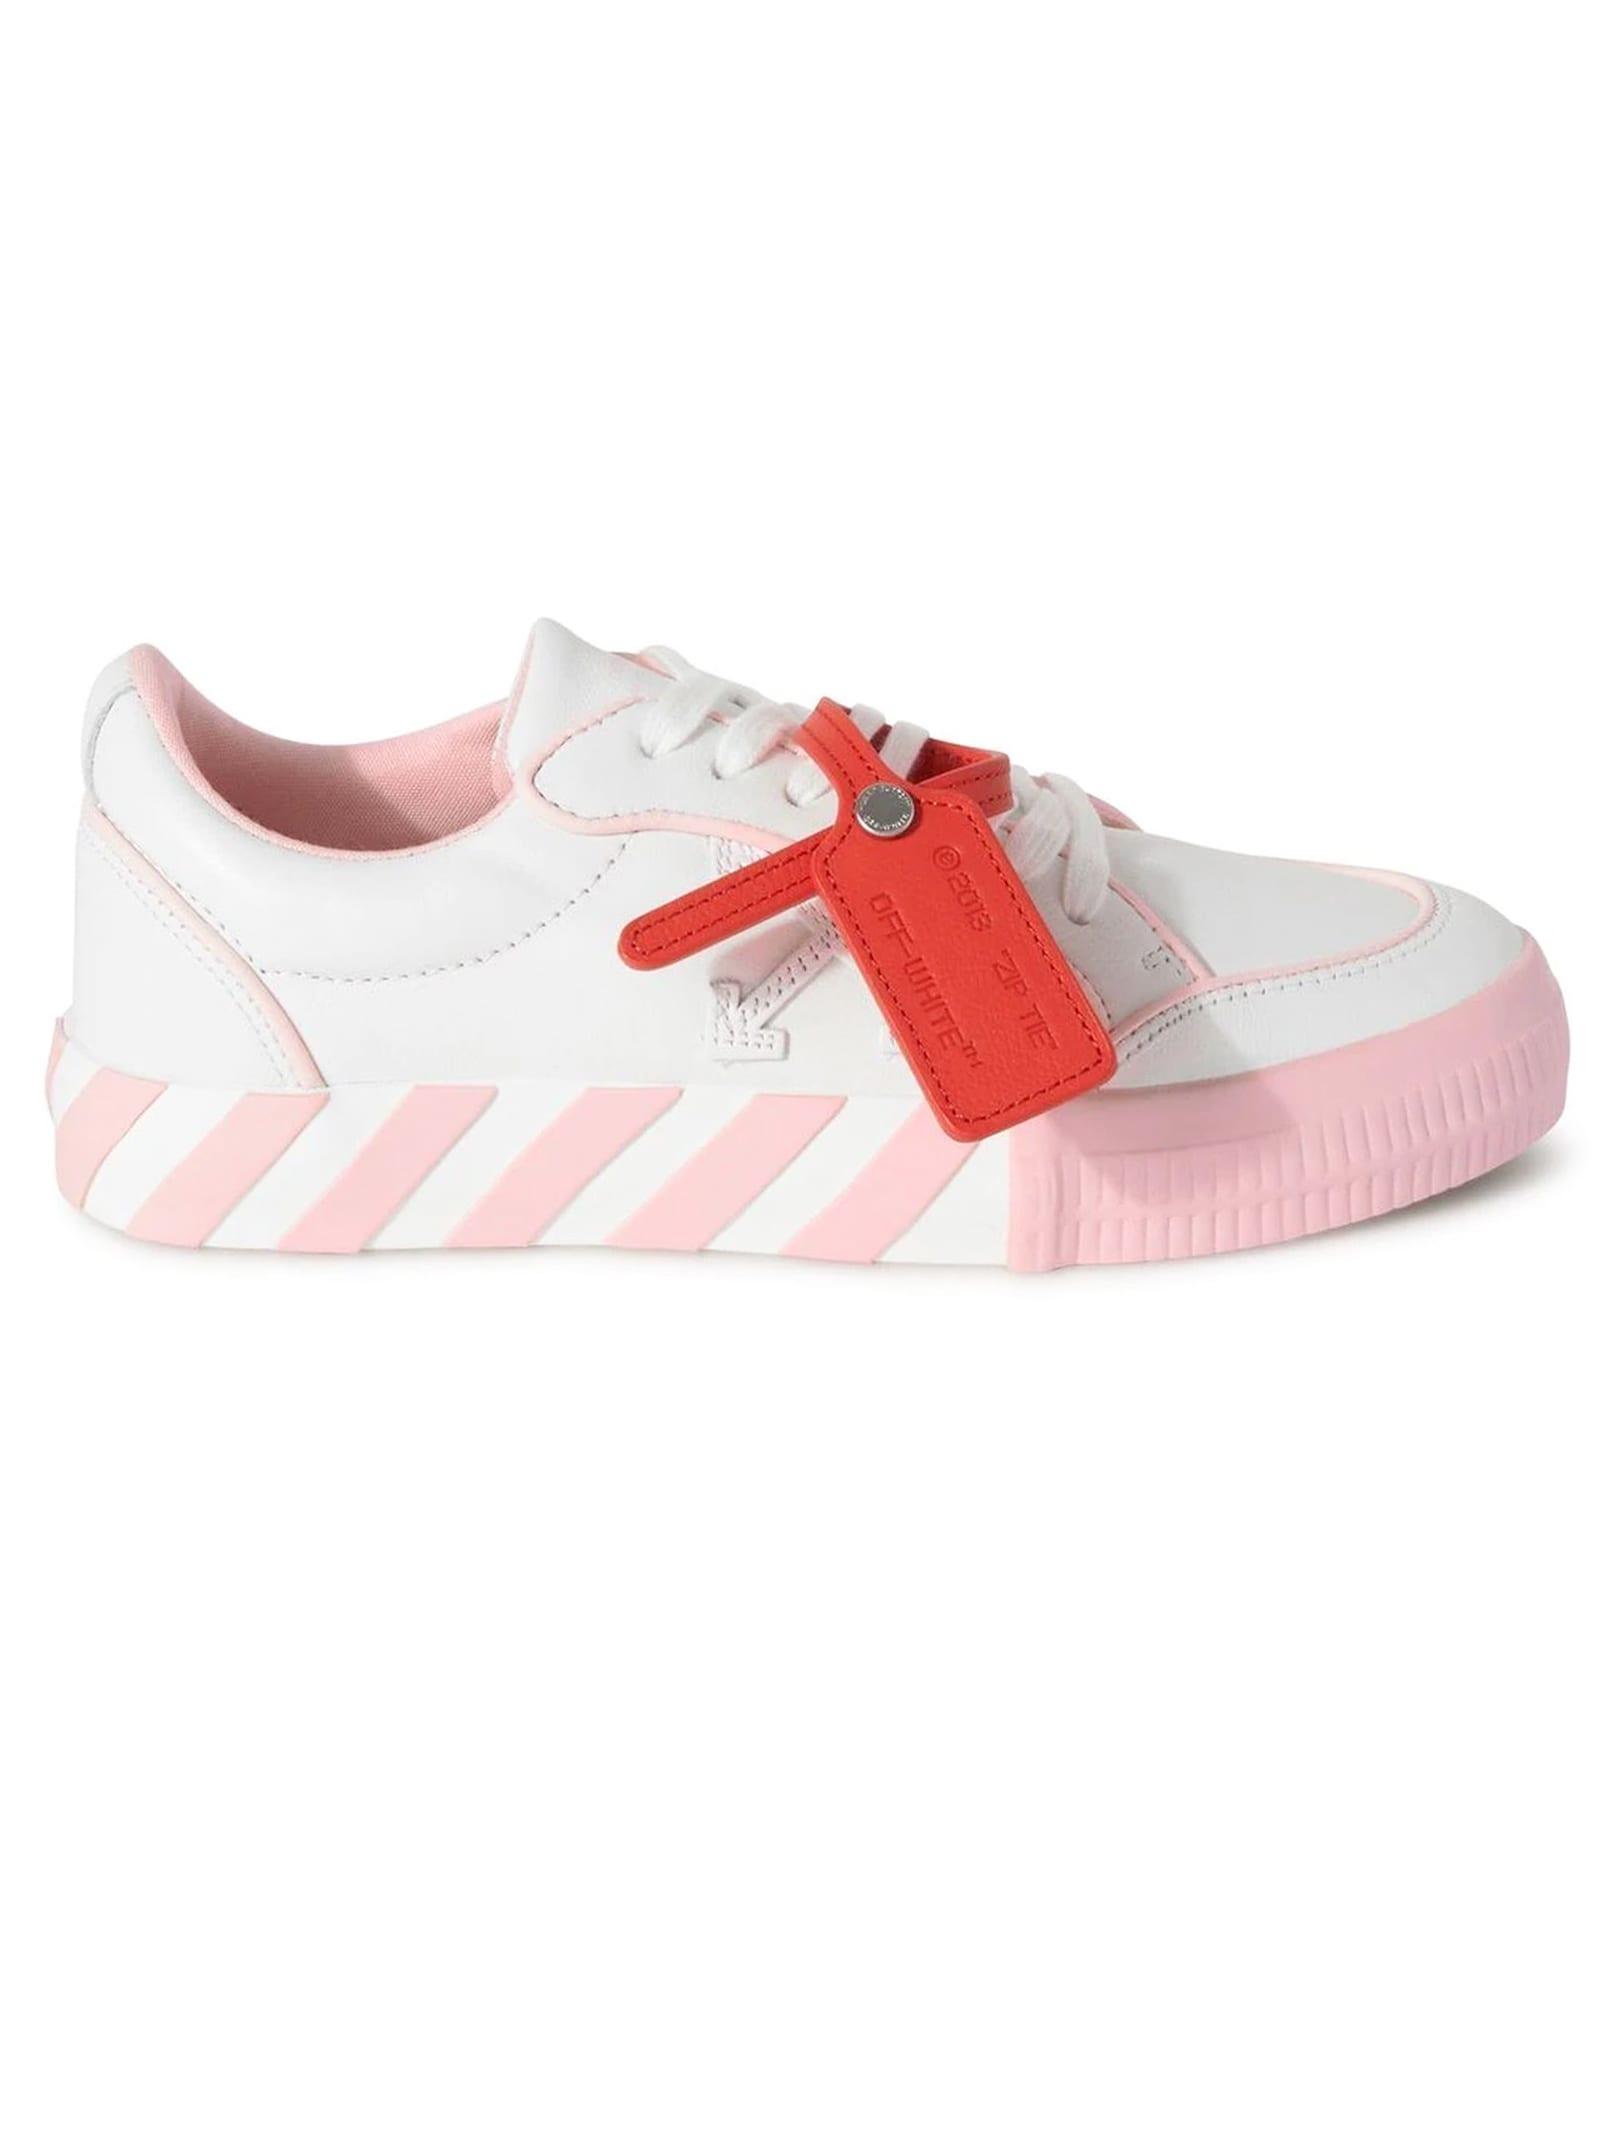 Off-White c/o Virgil Abloh White Vulcanized Outlined Sneakers in Red | Lyst